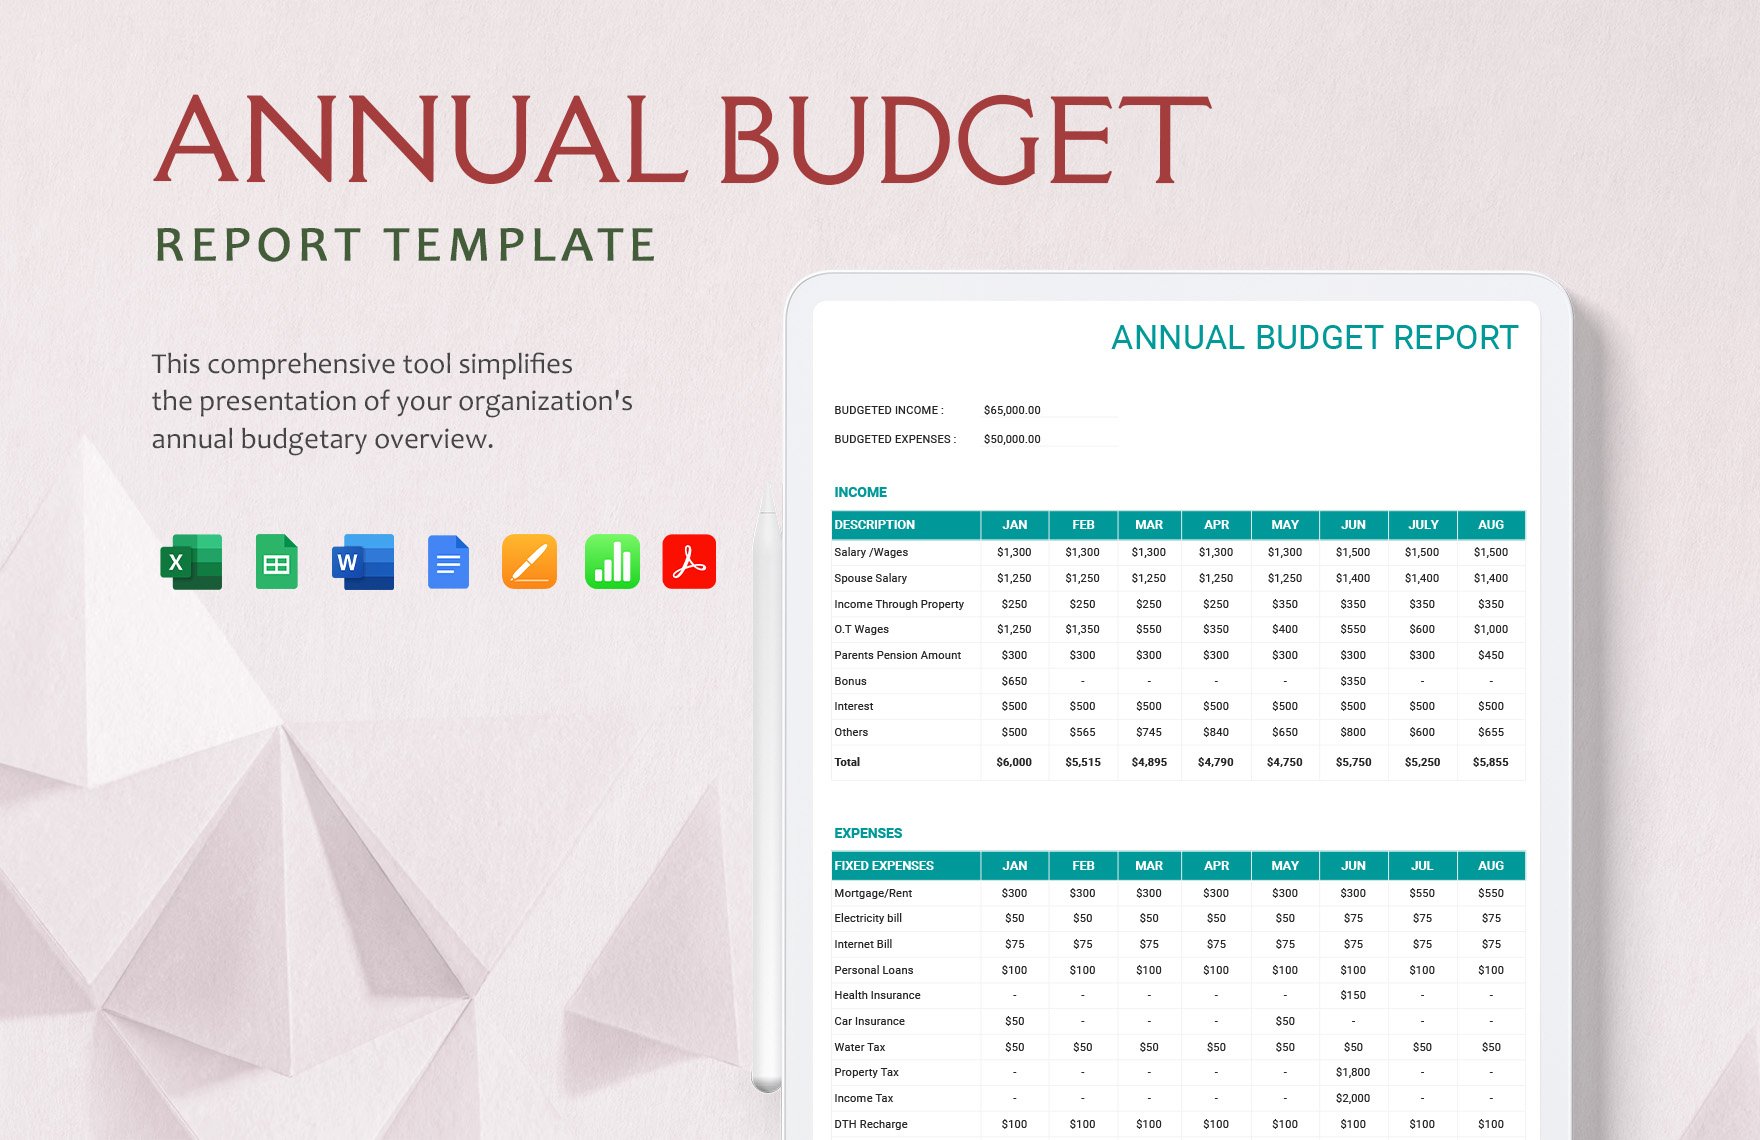 Free Annual Budget Report Template in Word, Google Docs, Excel, PDF, Google Sheets, Apple Pages, Apple Numbers